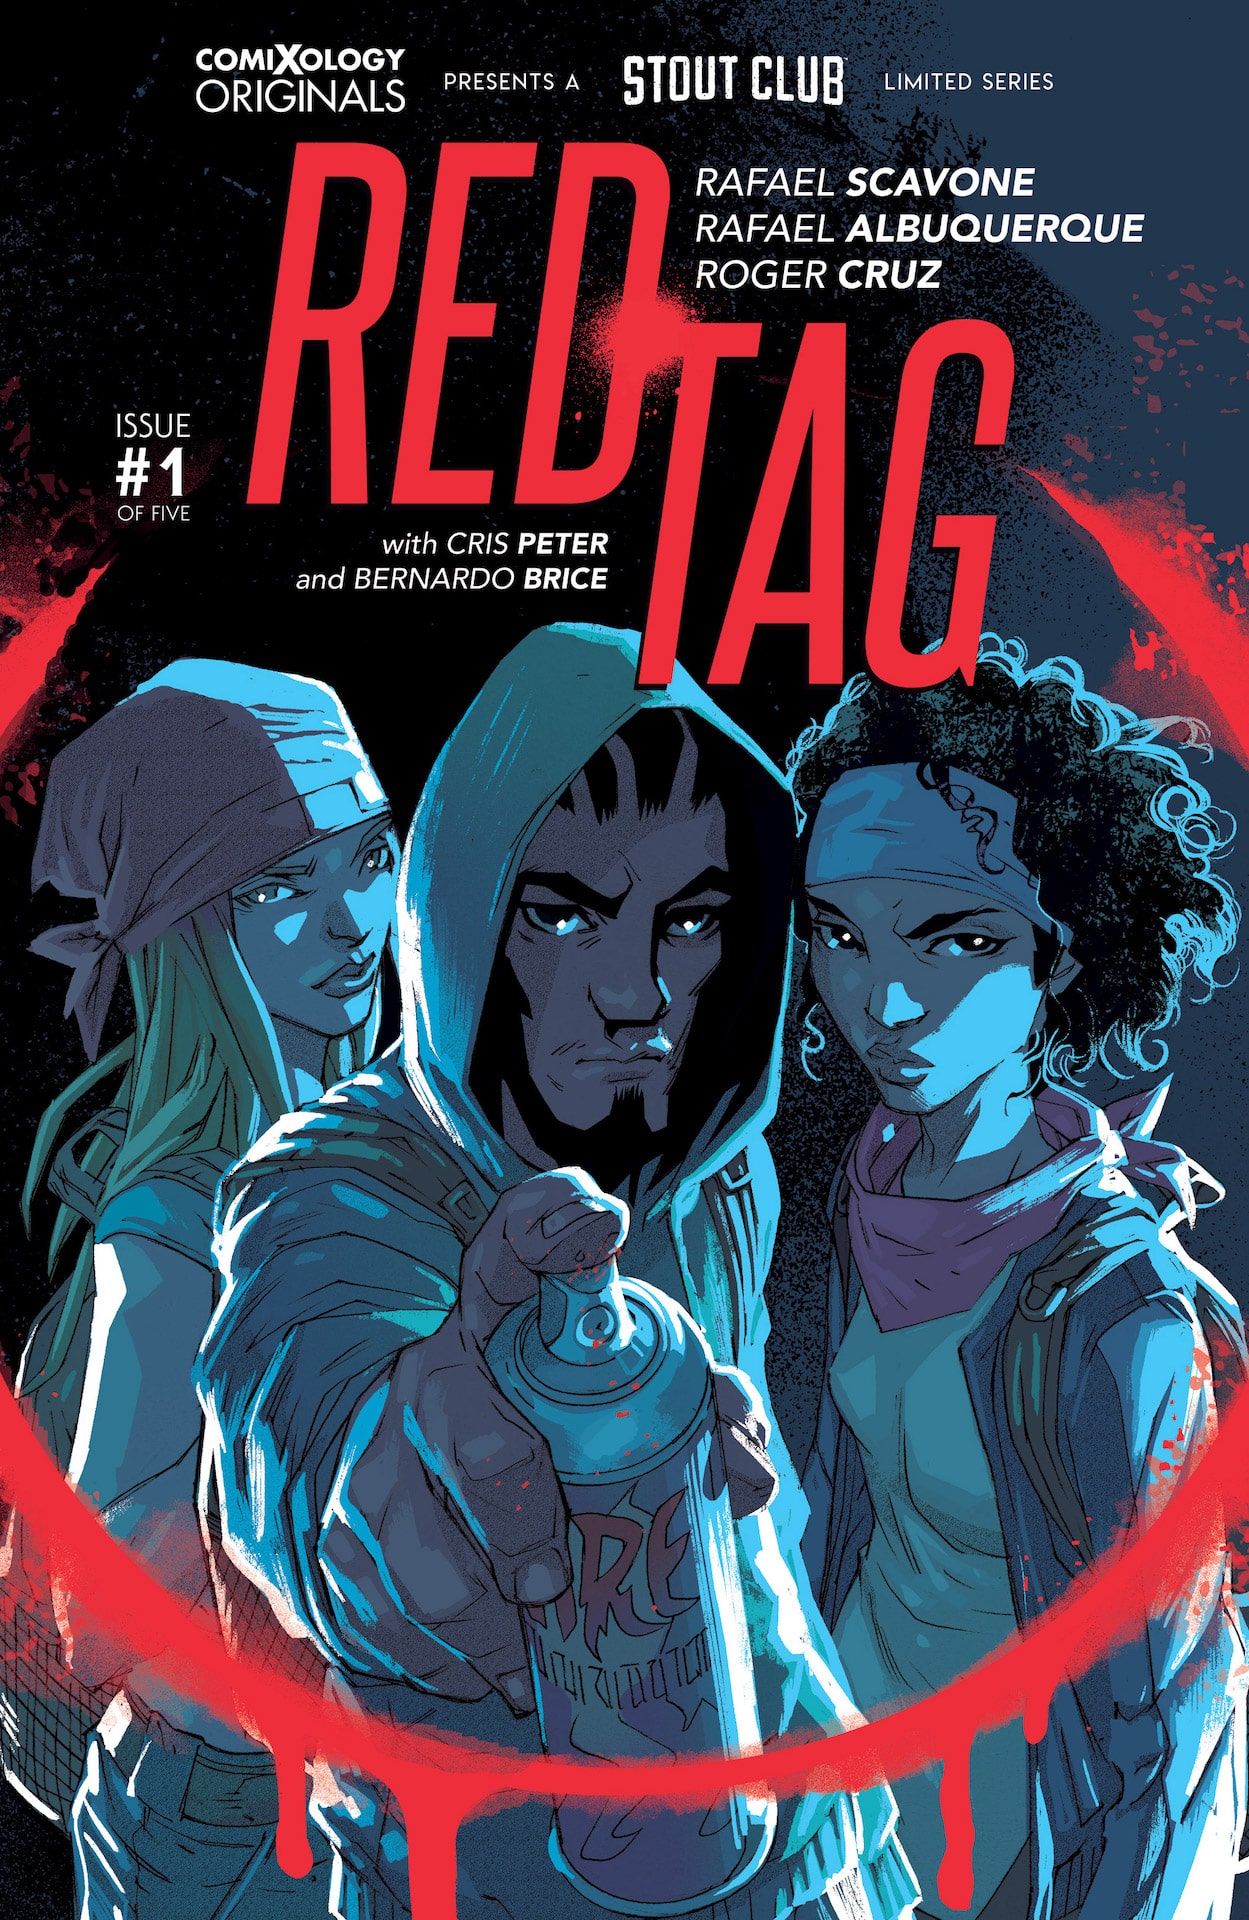 ComiXology Preview: Red Tag #1